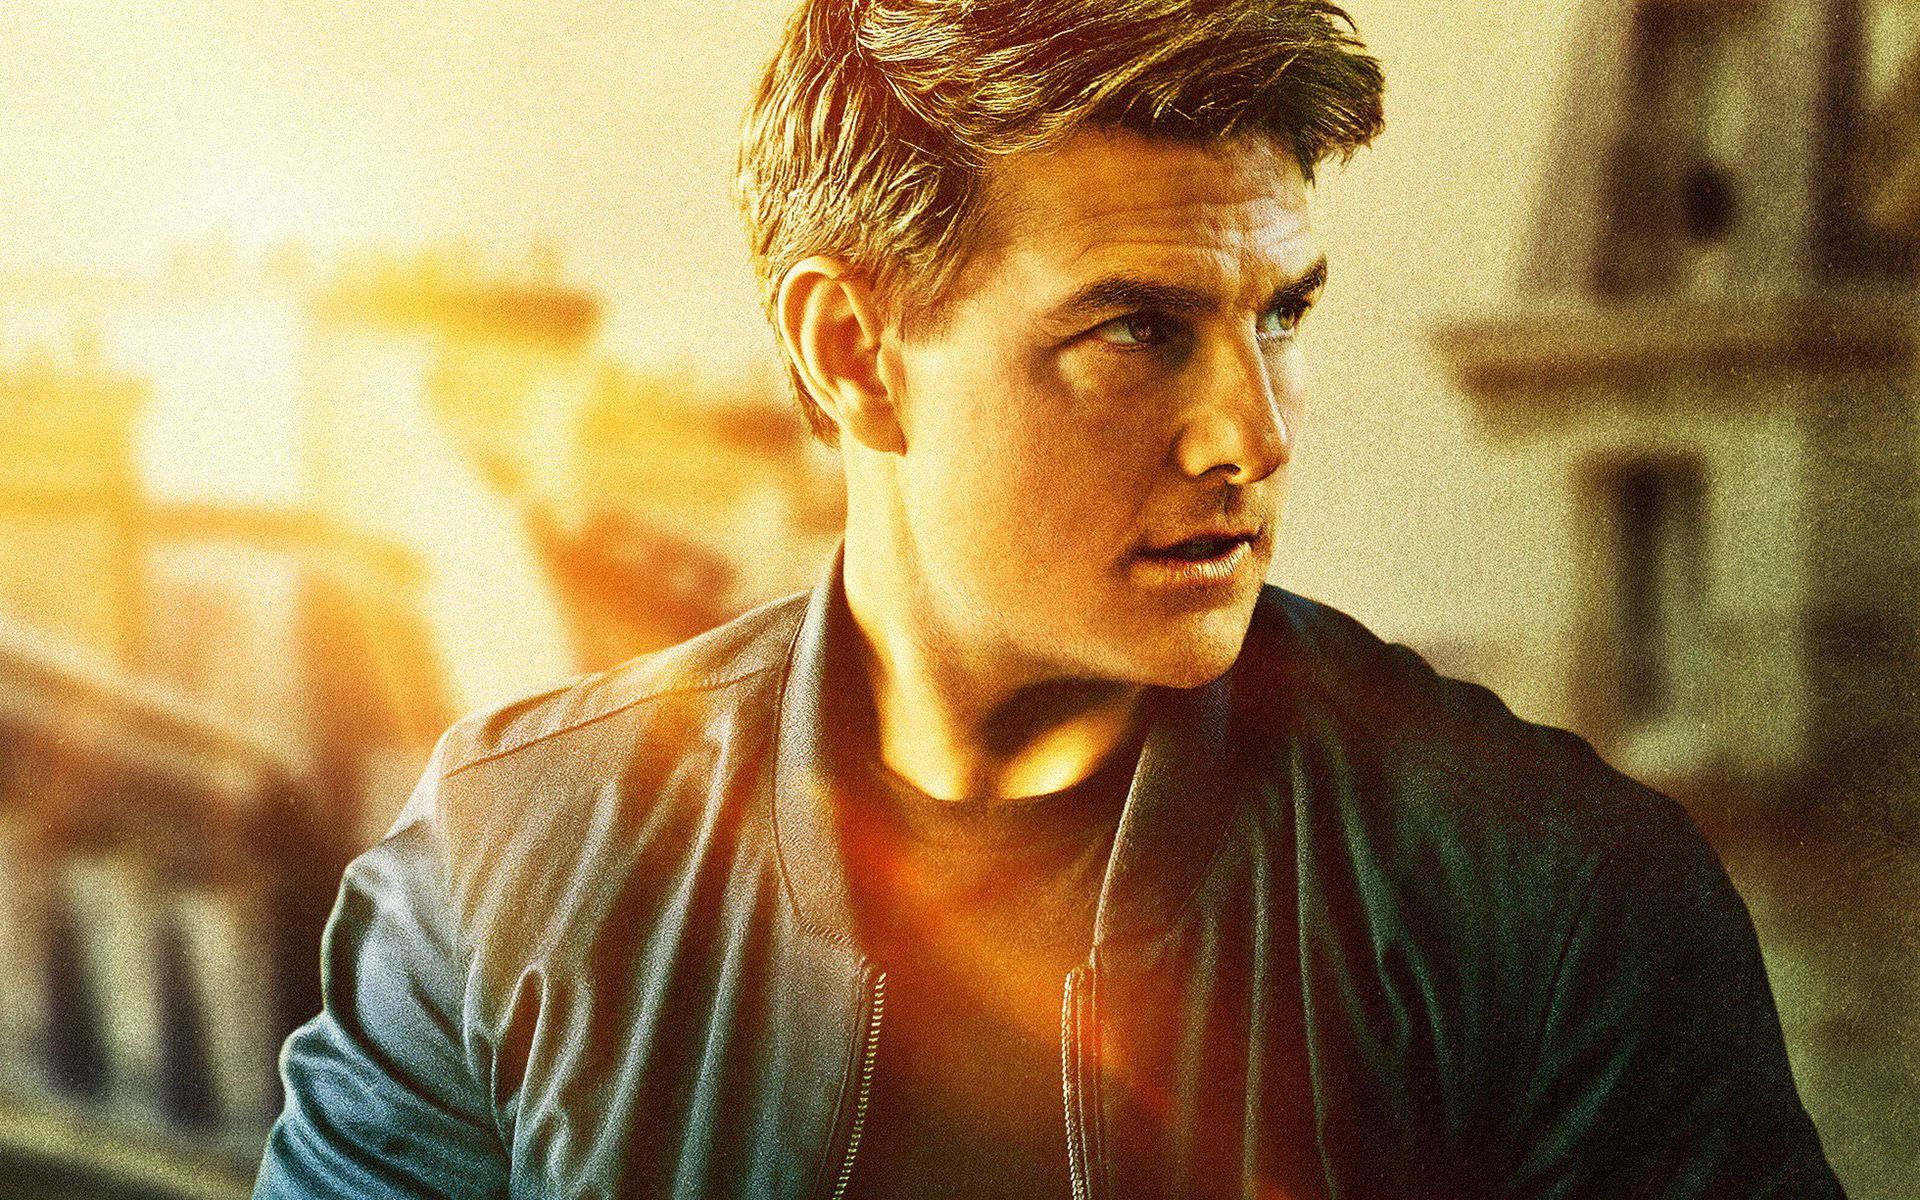 Mission Impossible Fallout. 1 Wallpaper